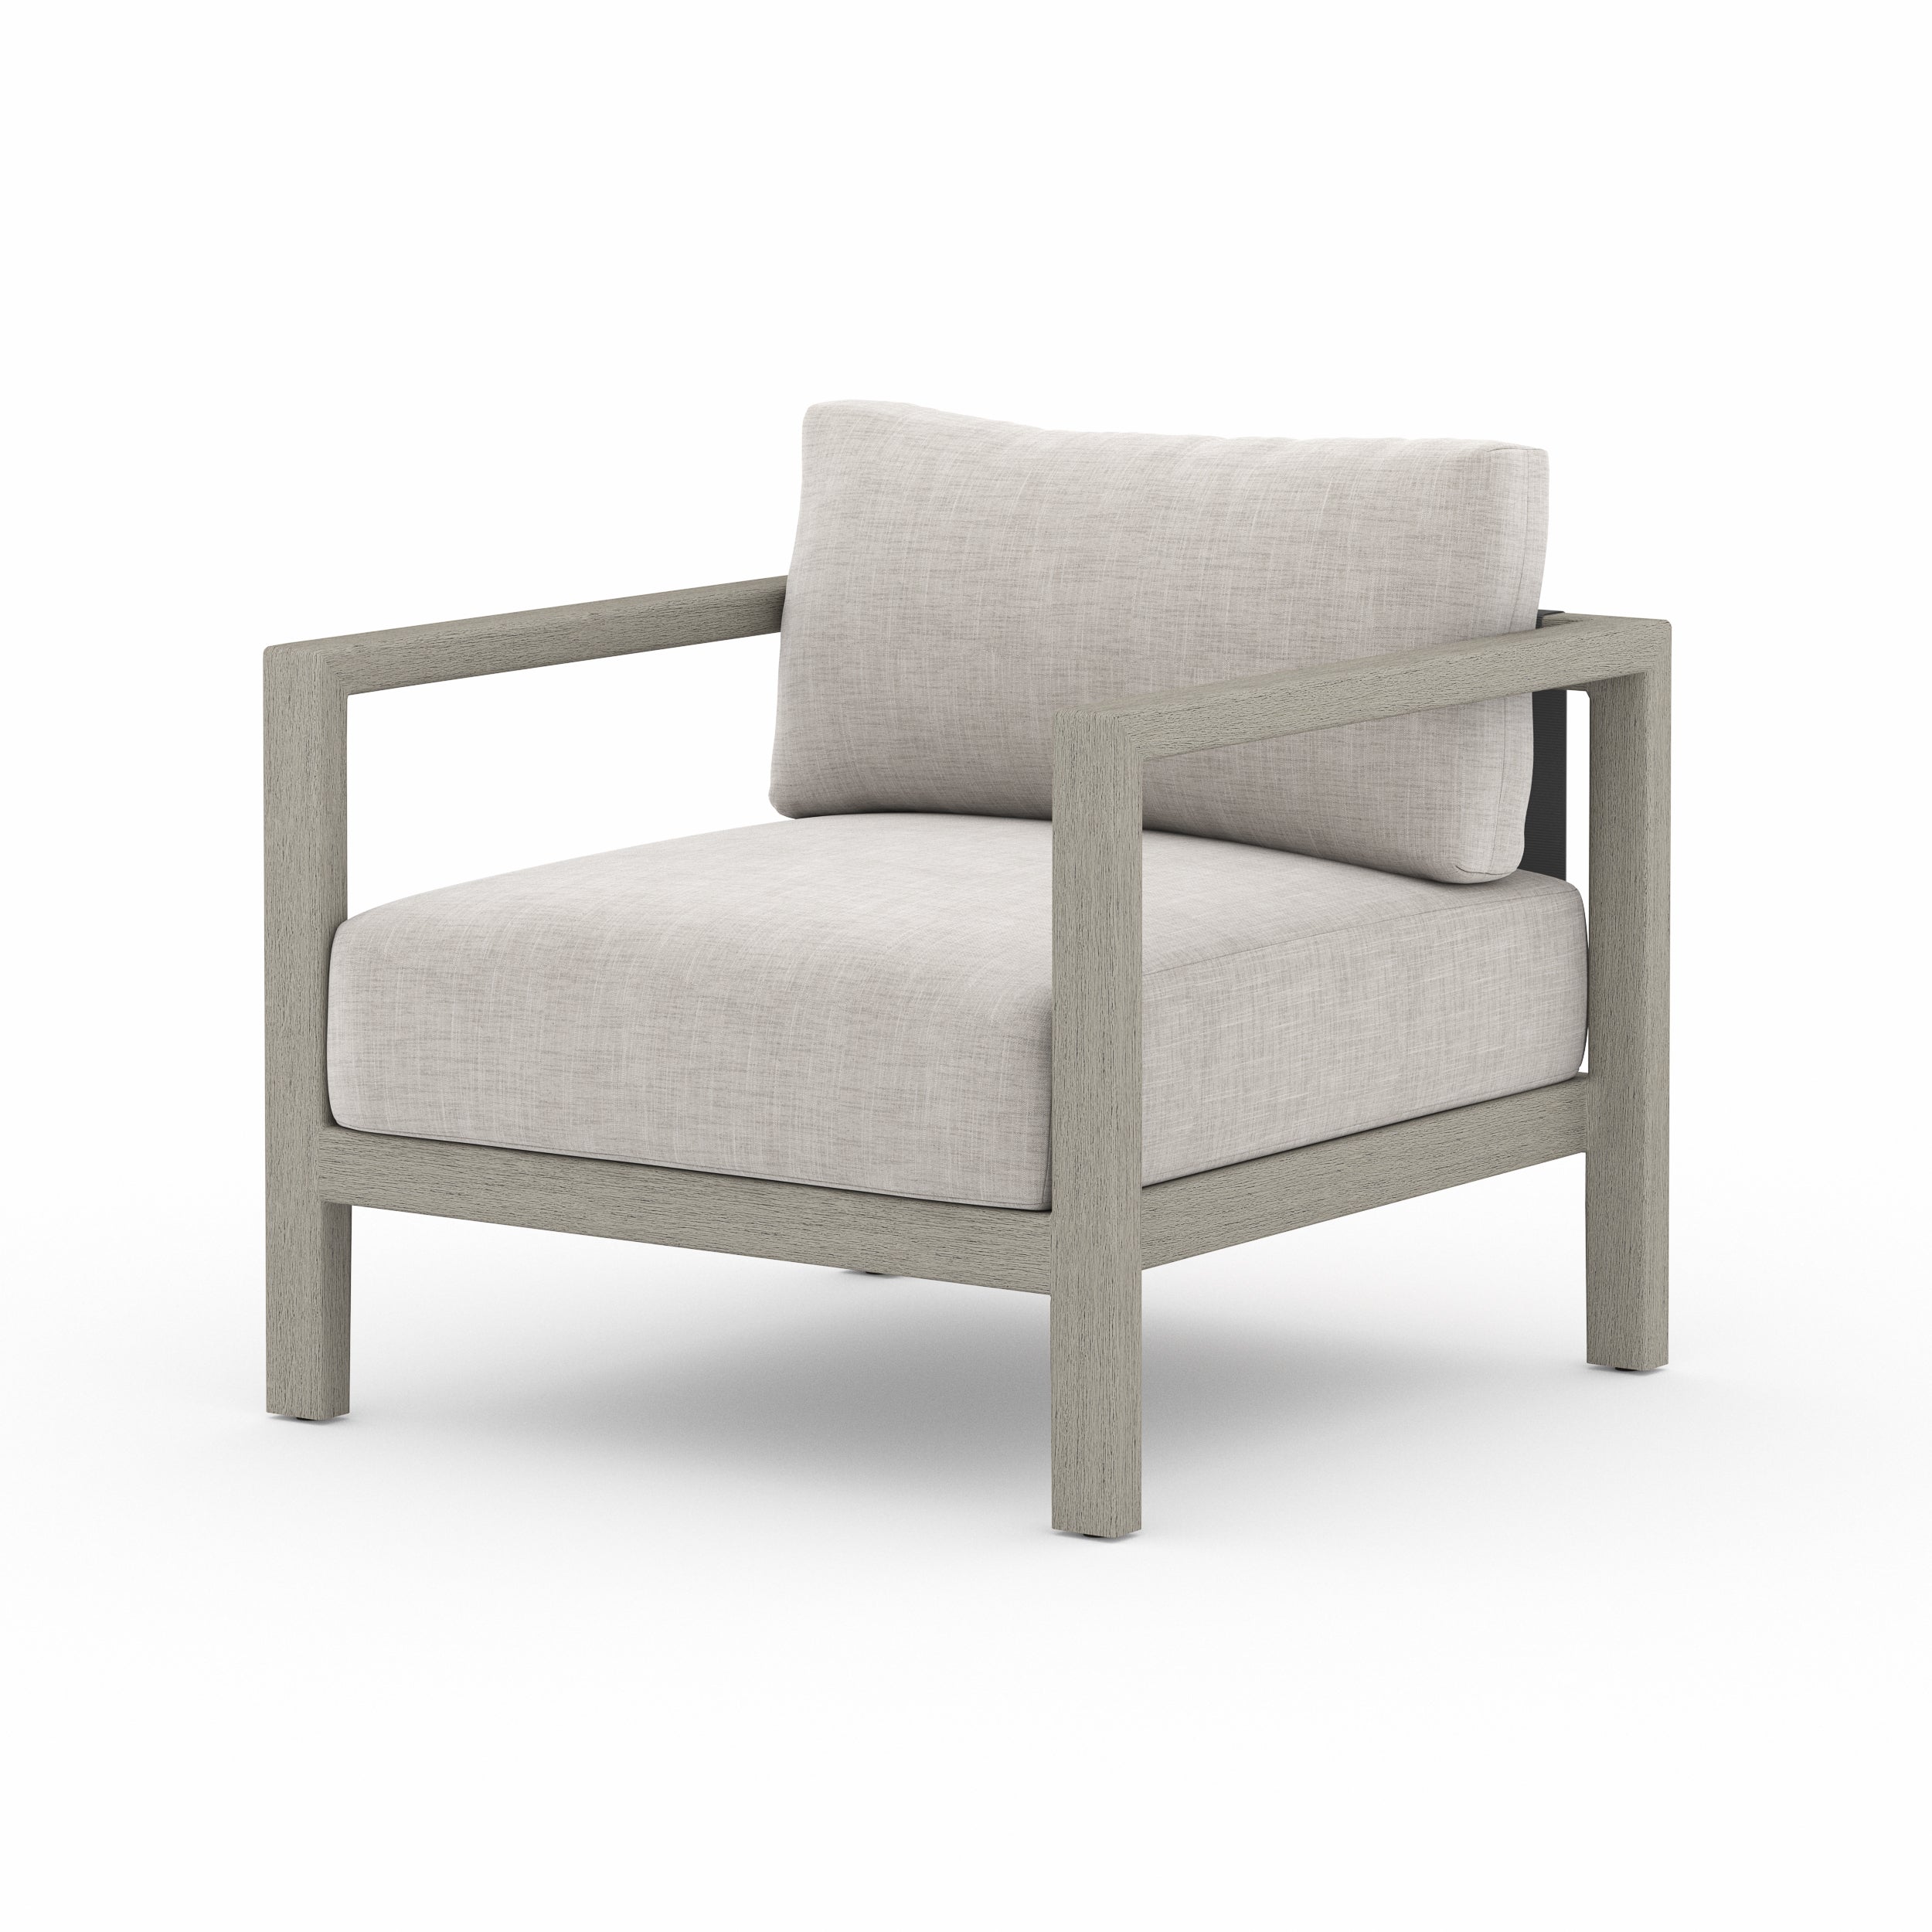 Sonoma Outdoor Chair - Weathered Grey